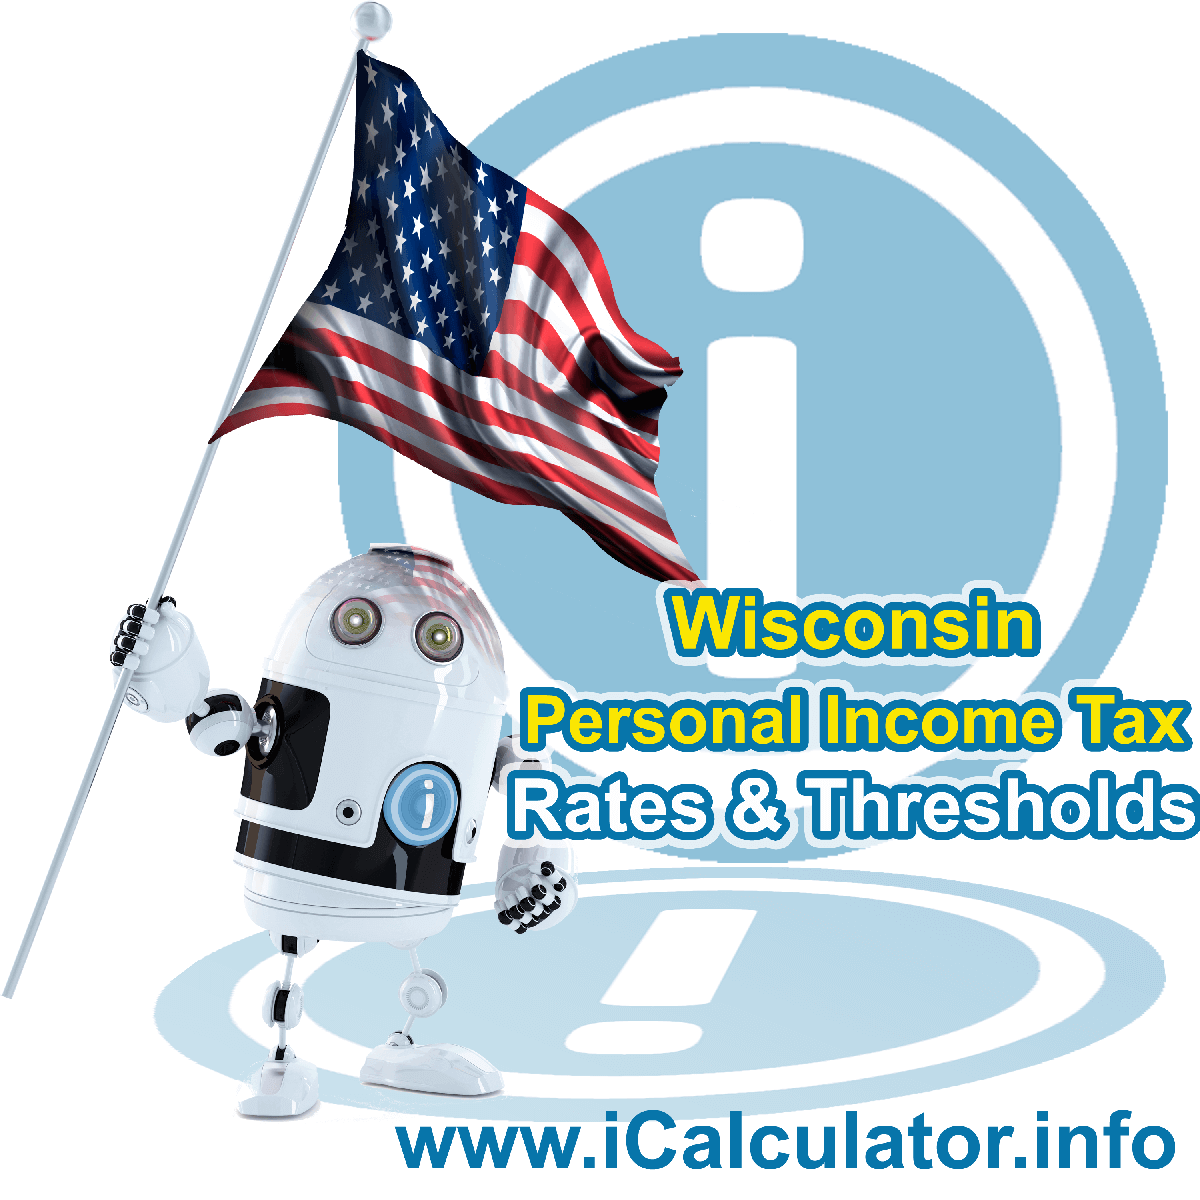 Wisconsin State Tax Tables 2019. This image displays details of the Wisconsin State Tax Tables for the 2019 tax return year which is provided in support of the 2019 US Tax Calculator